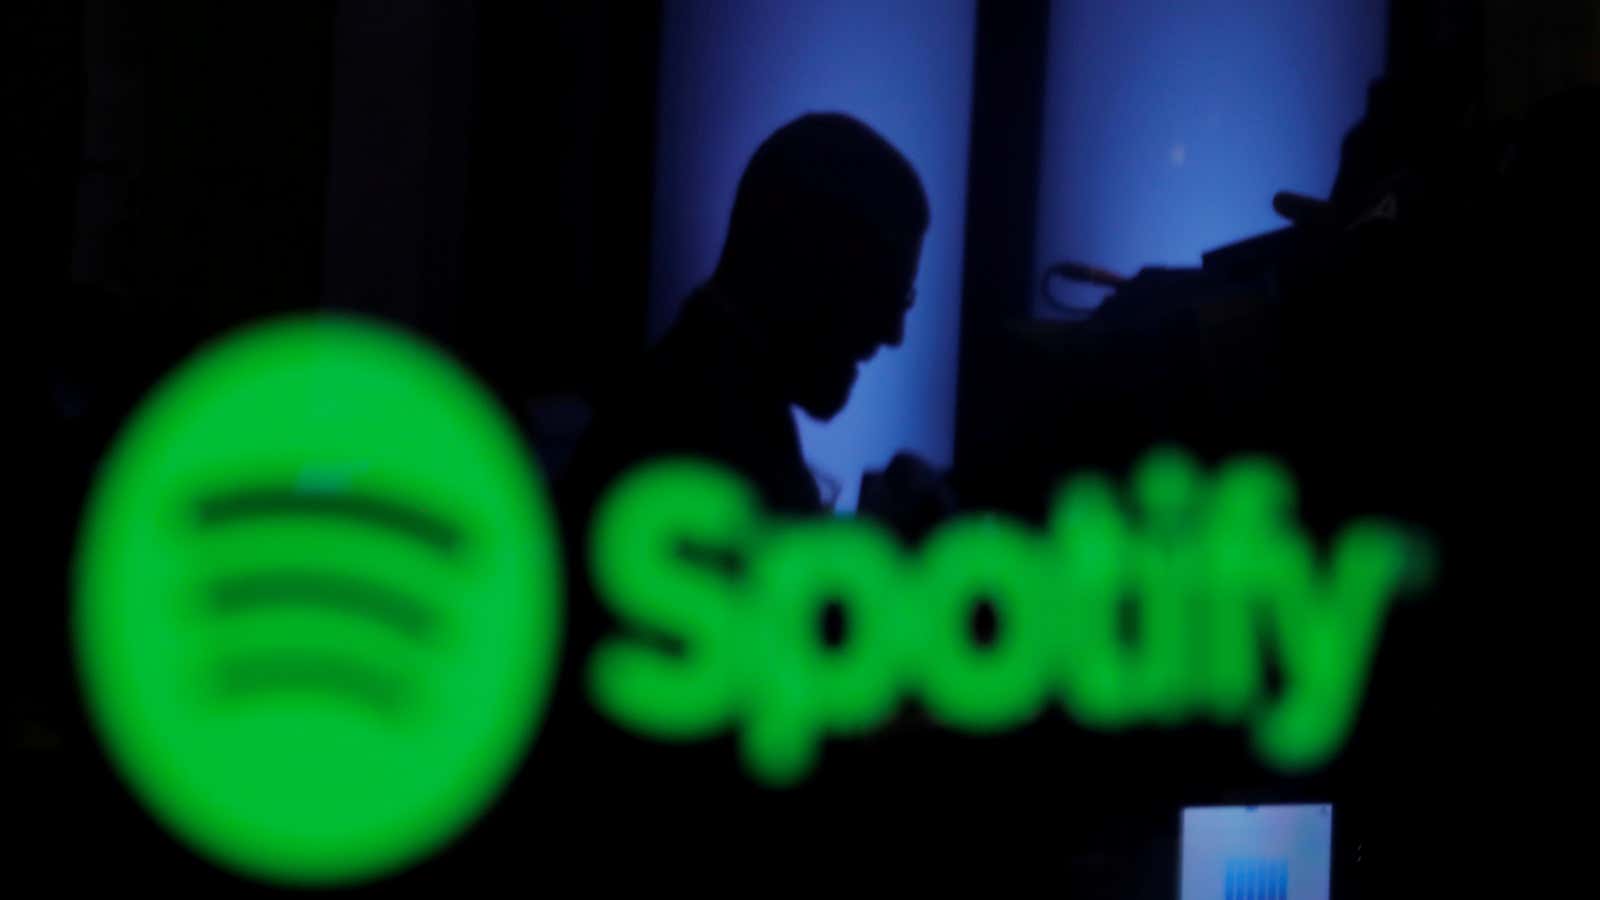 Here are the homegrown competitors facing Spotify in Africa